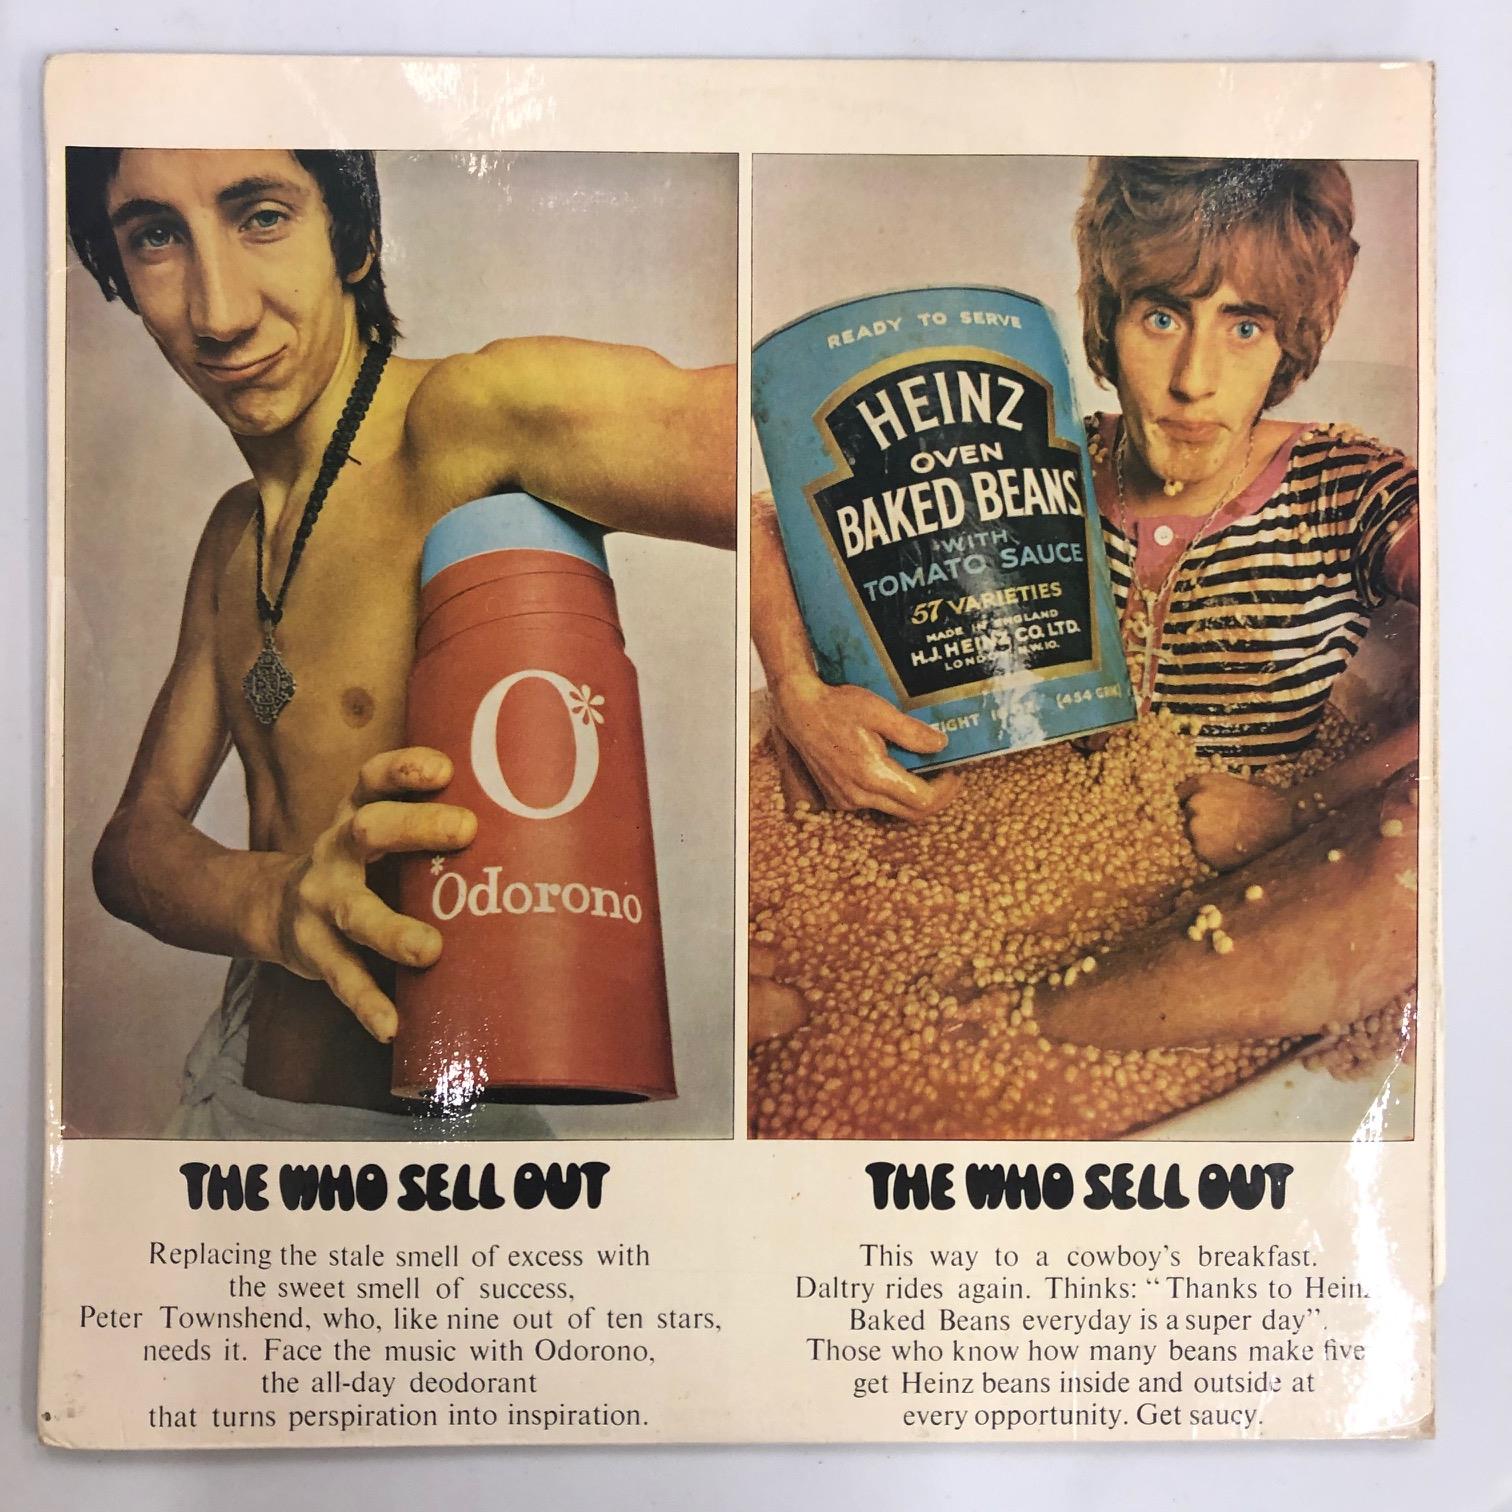 Vinyl - The Who - The Who Sell Out Australian test pressing / white label in Stereo